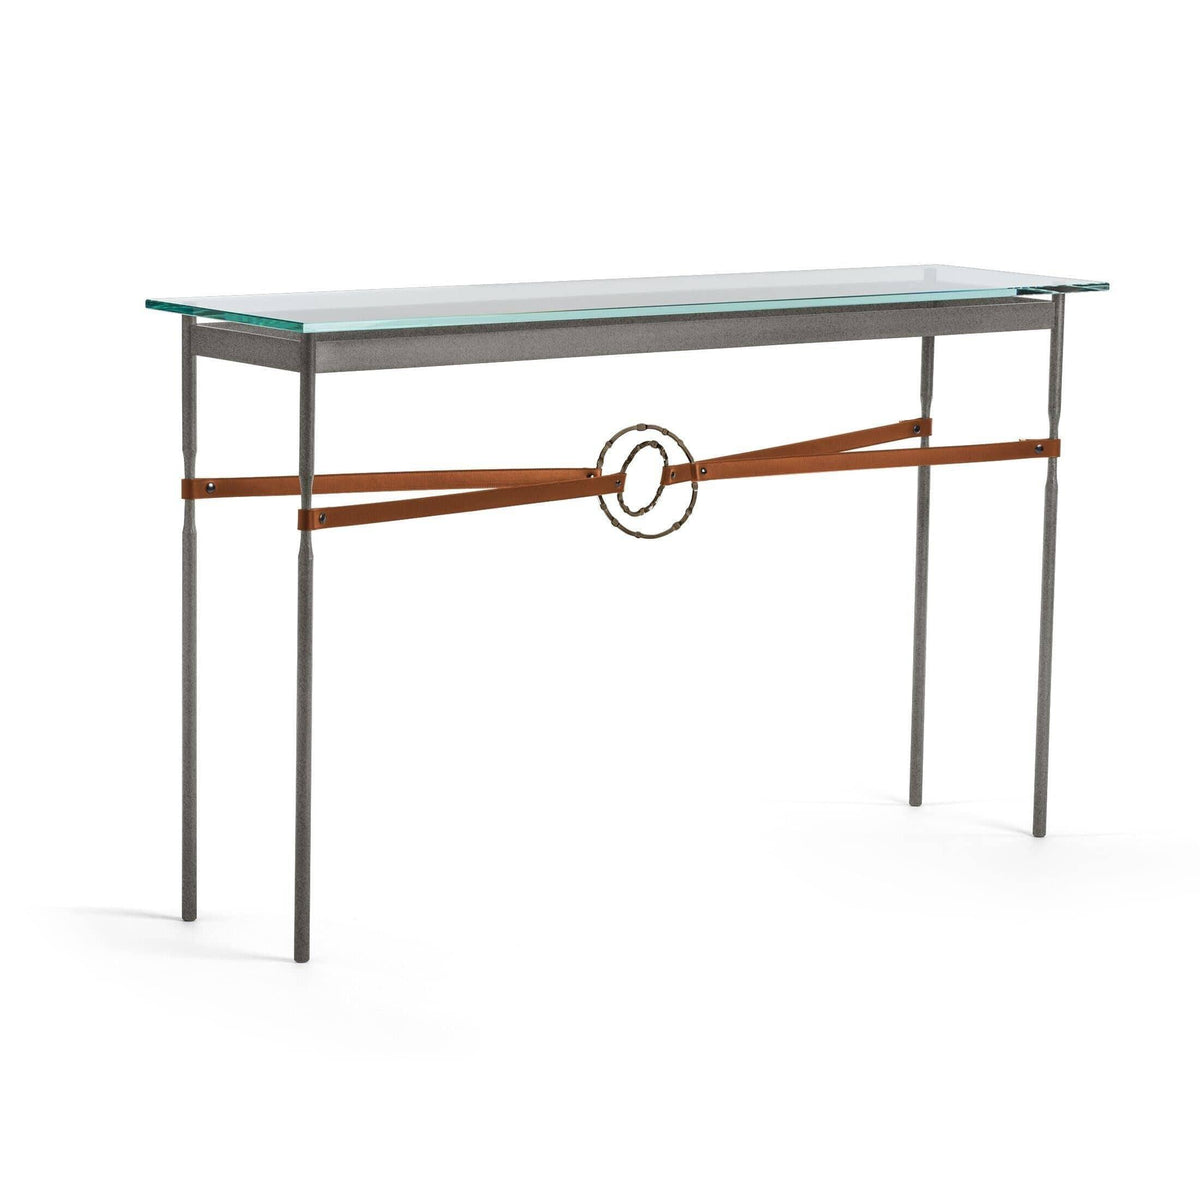 Hubbardton Forge - Equus Chestnut Leather Console Table - 750118-20-05-LC-VA0714 | Montreal Lighting & Hardware